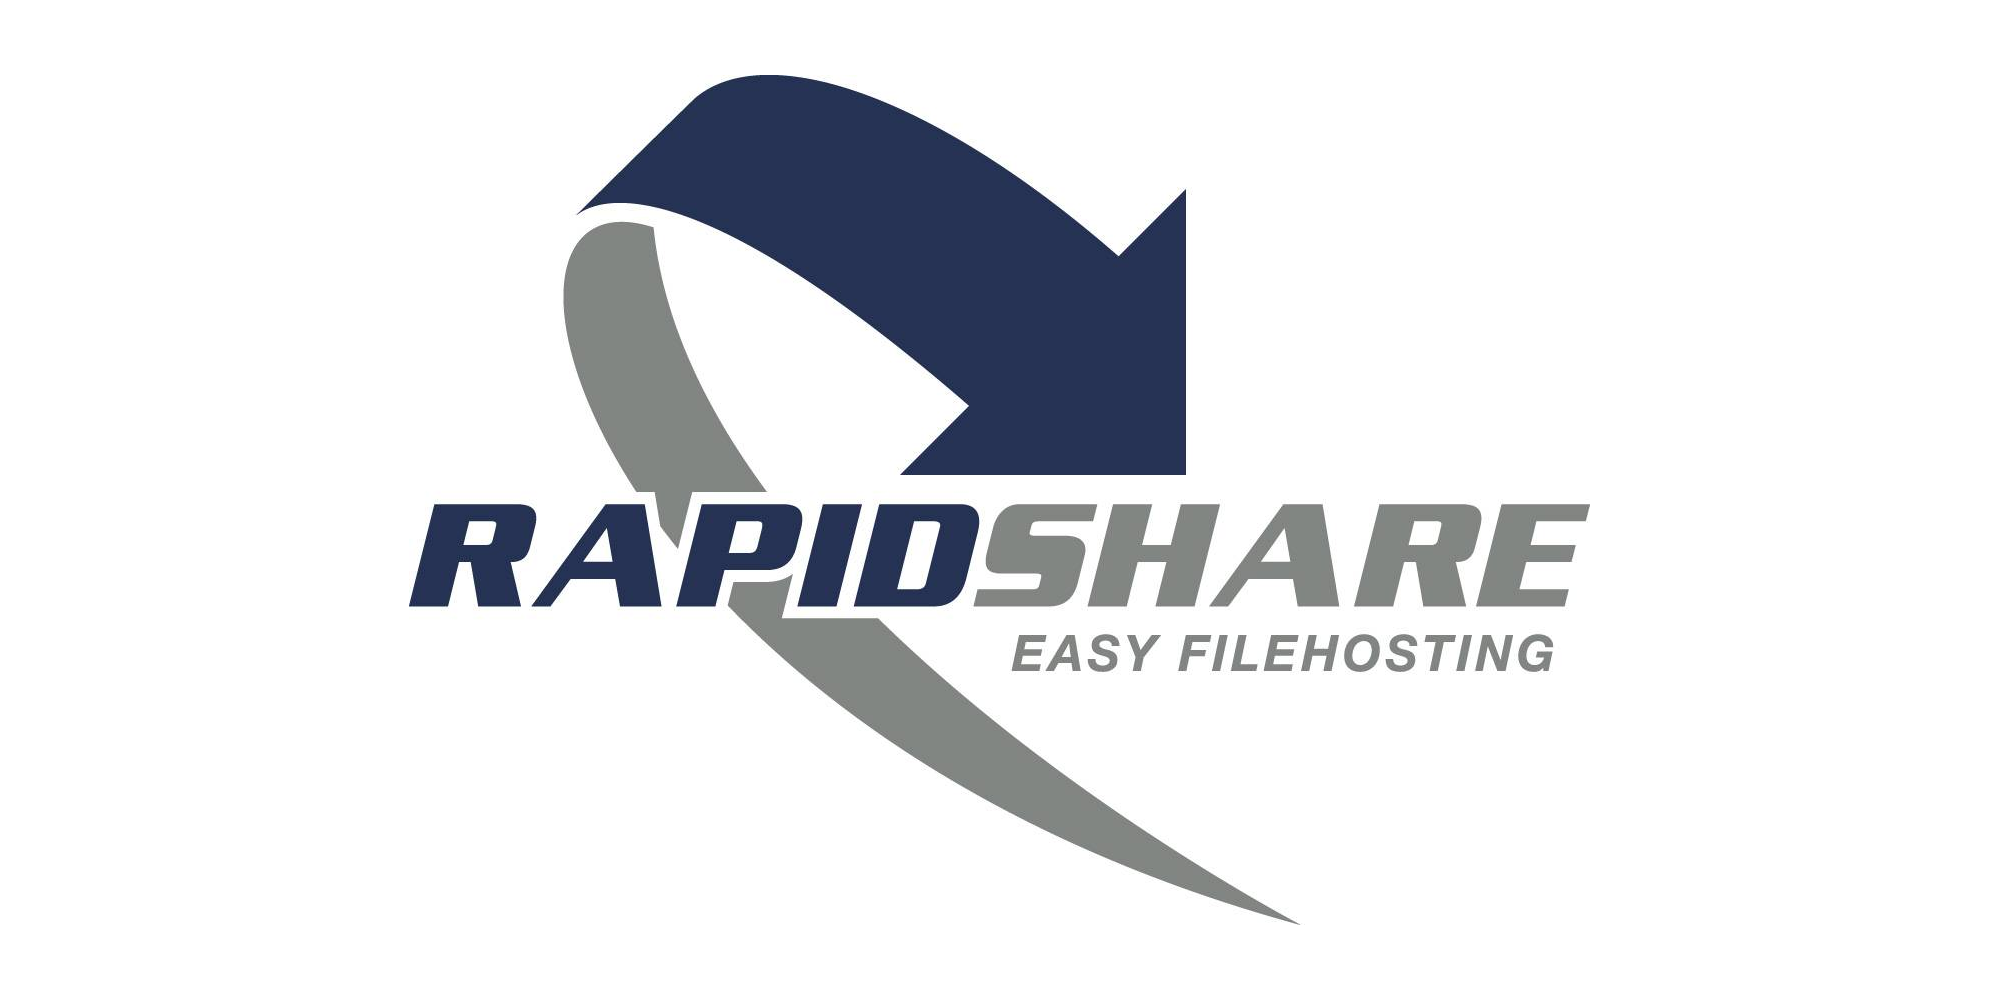 Bypass Rapidshare's Restrictions